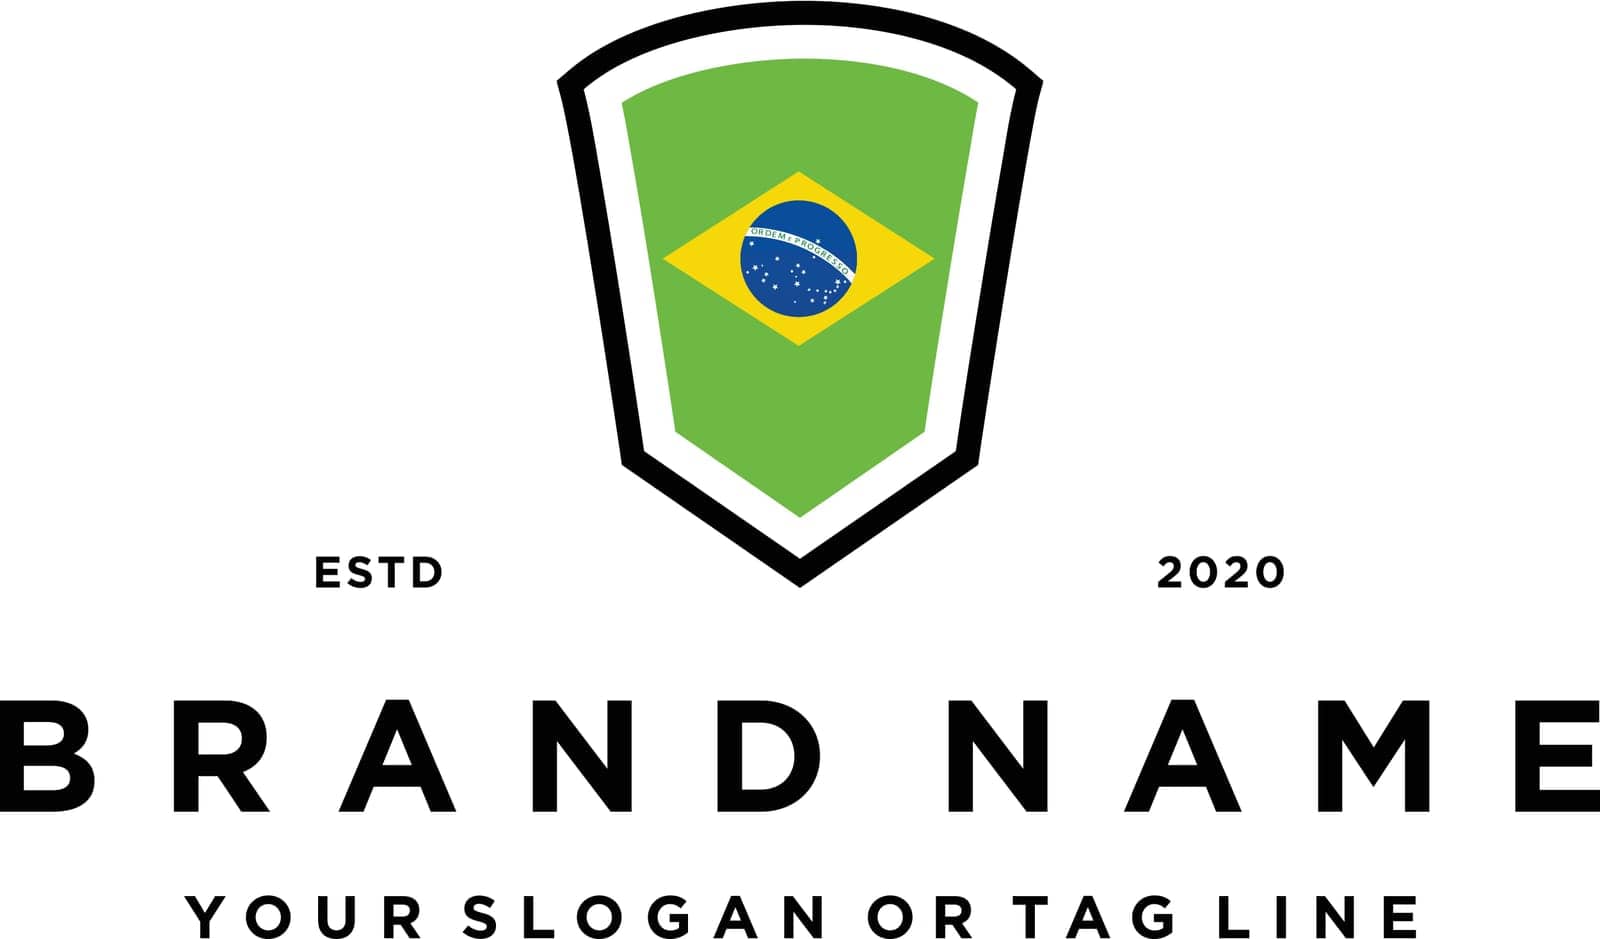 country,symbol,nation,sign,cover,presentation,championship,logo,international,decoration,emblem,element,ribbon,badge,winner,background,poster,card,champion,template,shield,game,flag,brazil,idea,book,icon,yellow,tournament,modern,design,national,vector,graphic,soccer,art,green,star,business,match,banner,label,abstract,team,football,blue,elements,illustration,sport by ogqcorp